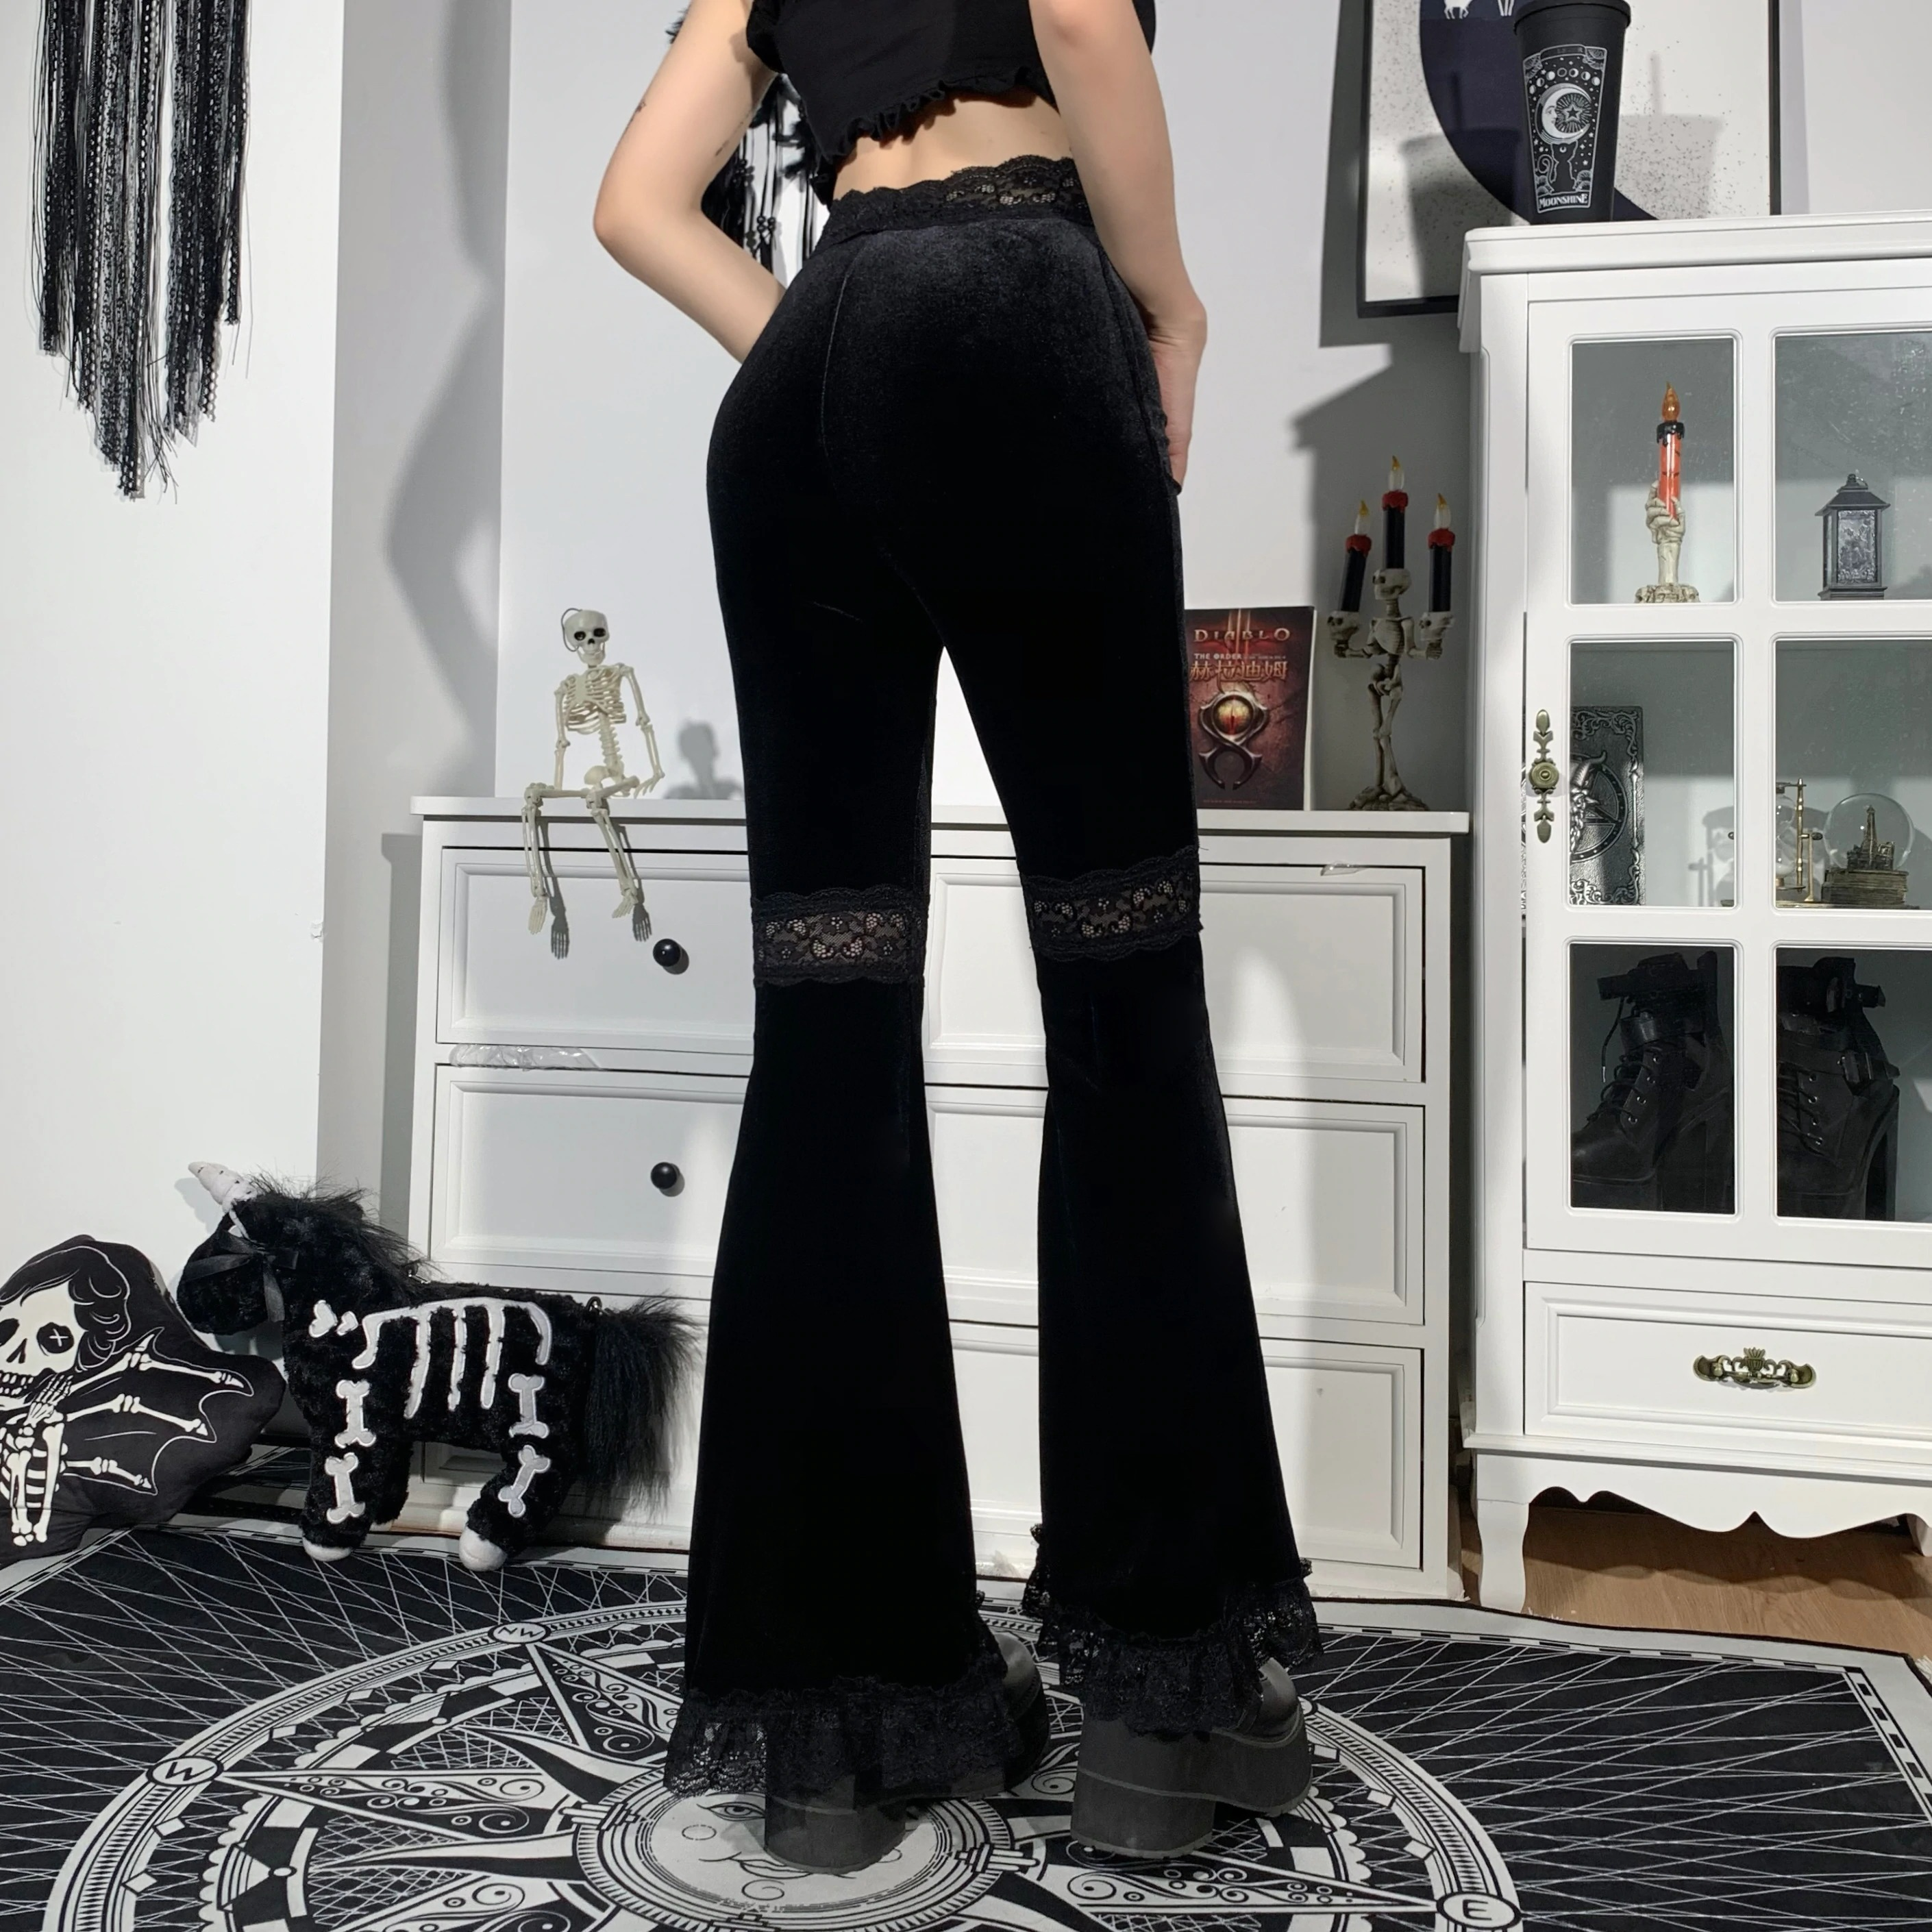 Velvet Gothic Lace Patchwork Flare Pants / Romantic Vintage Grunge Skinny Emo Trousers - HARD'N'HEAVY